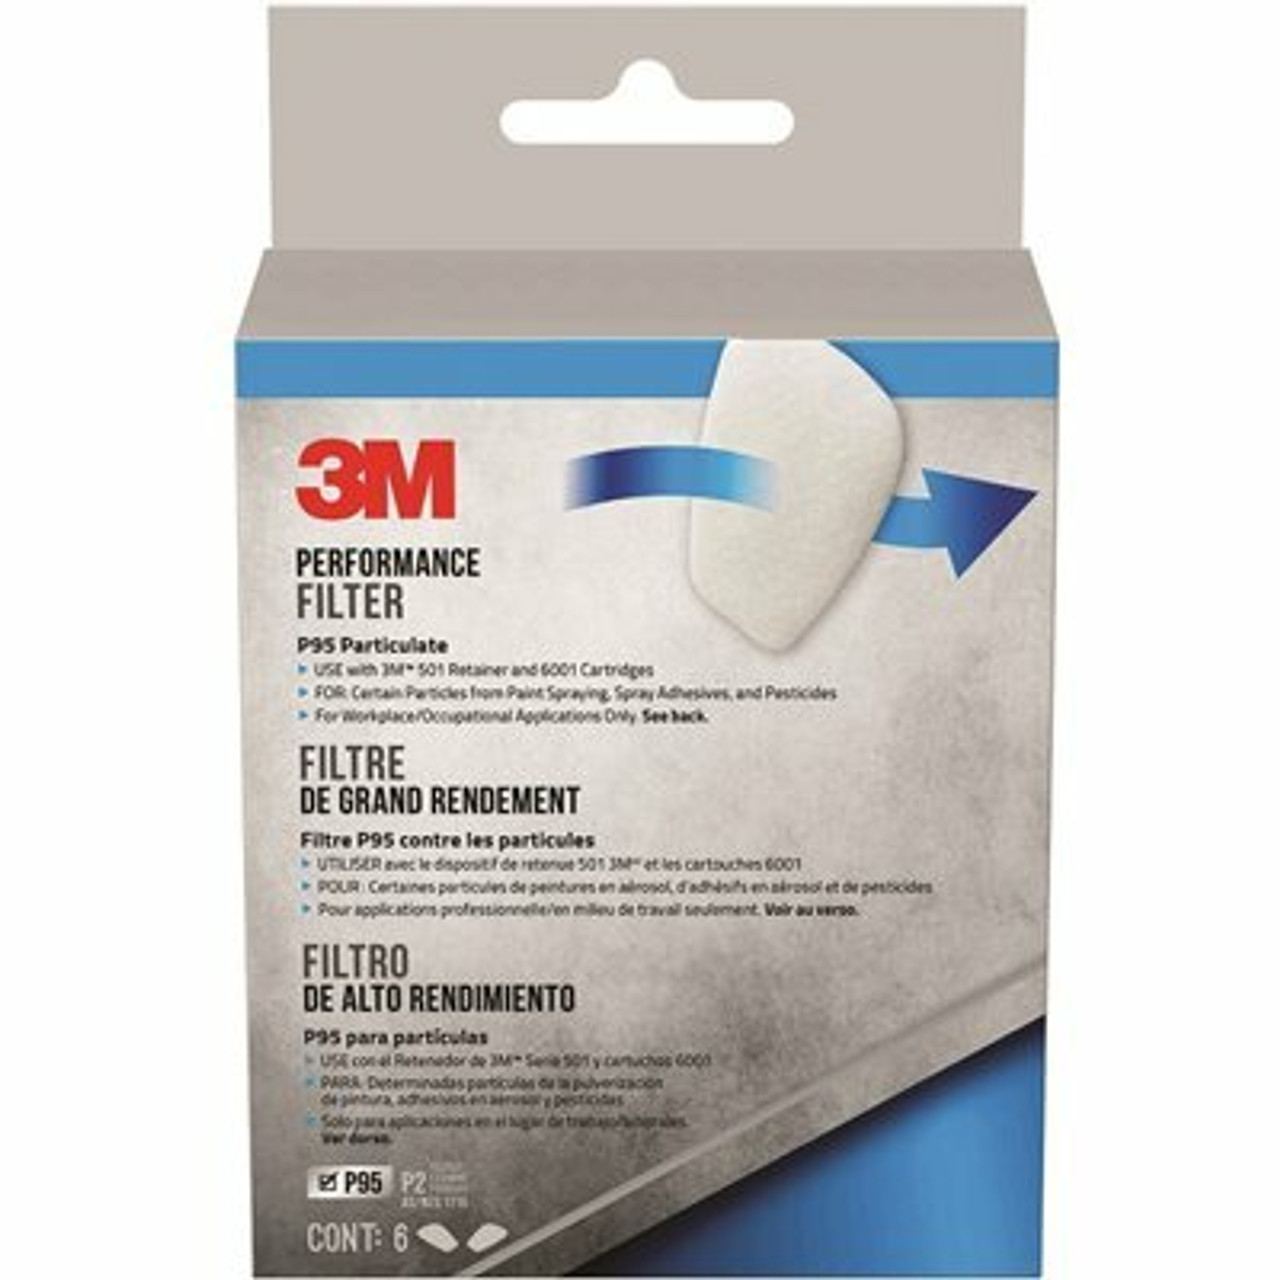 3M P95 Particulate Replacement Respirator Filter (Case Of 6)